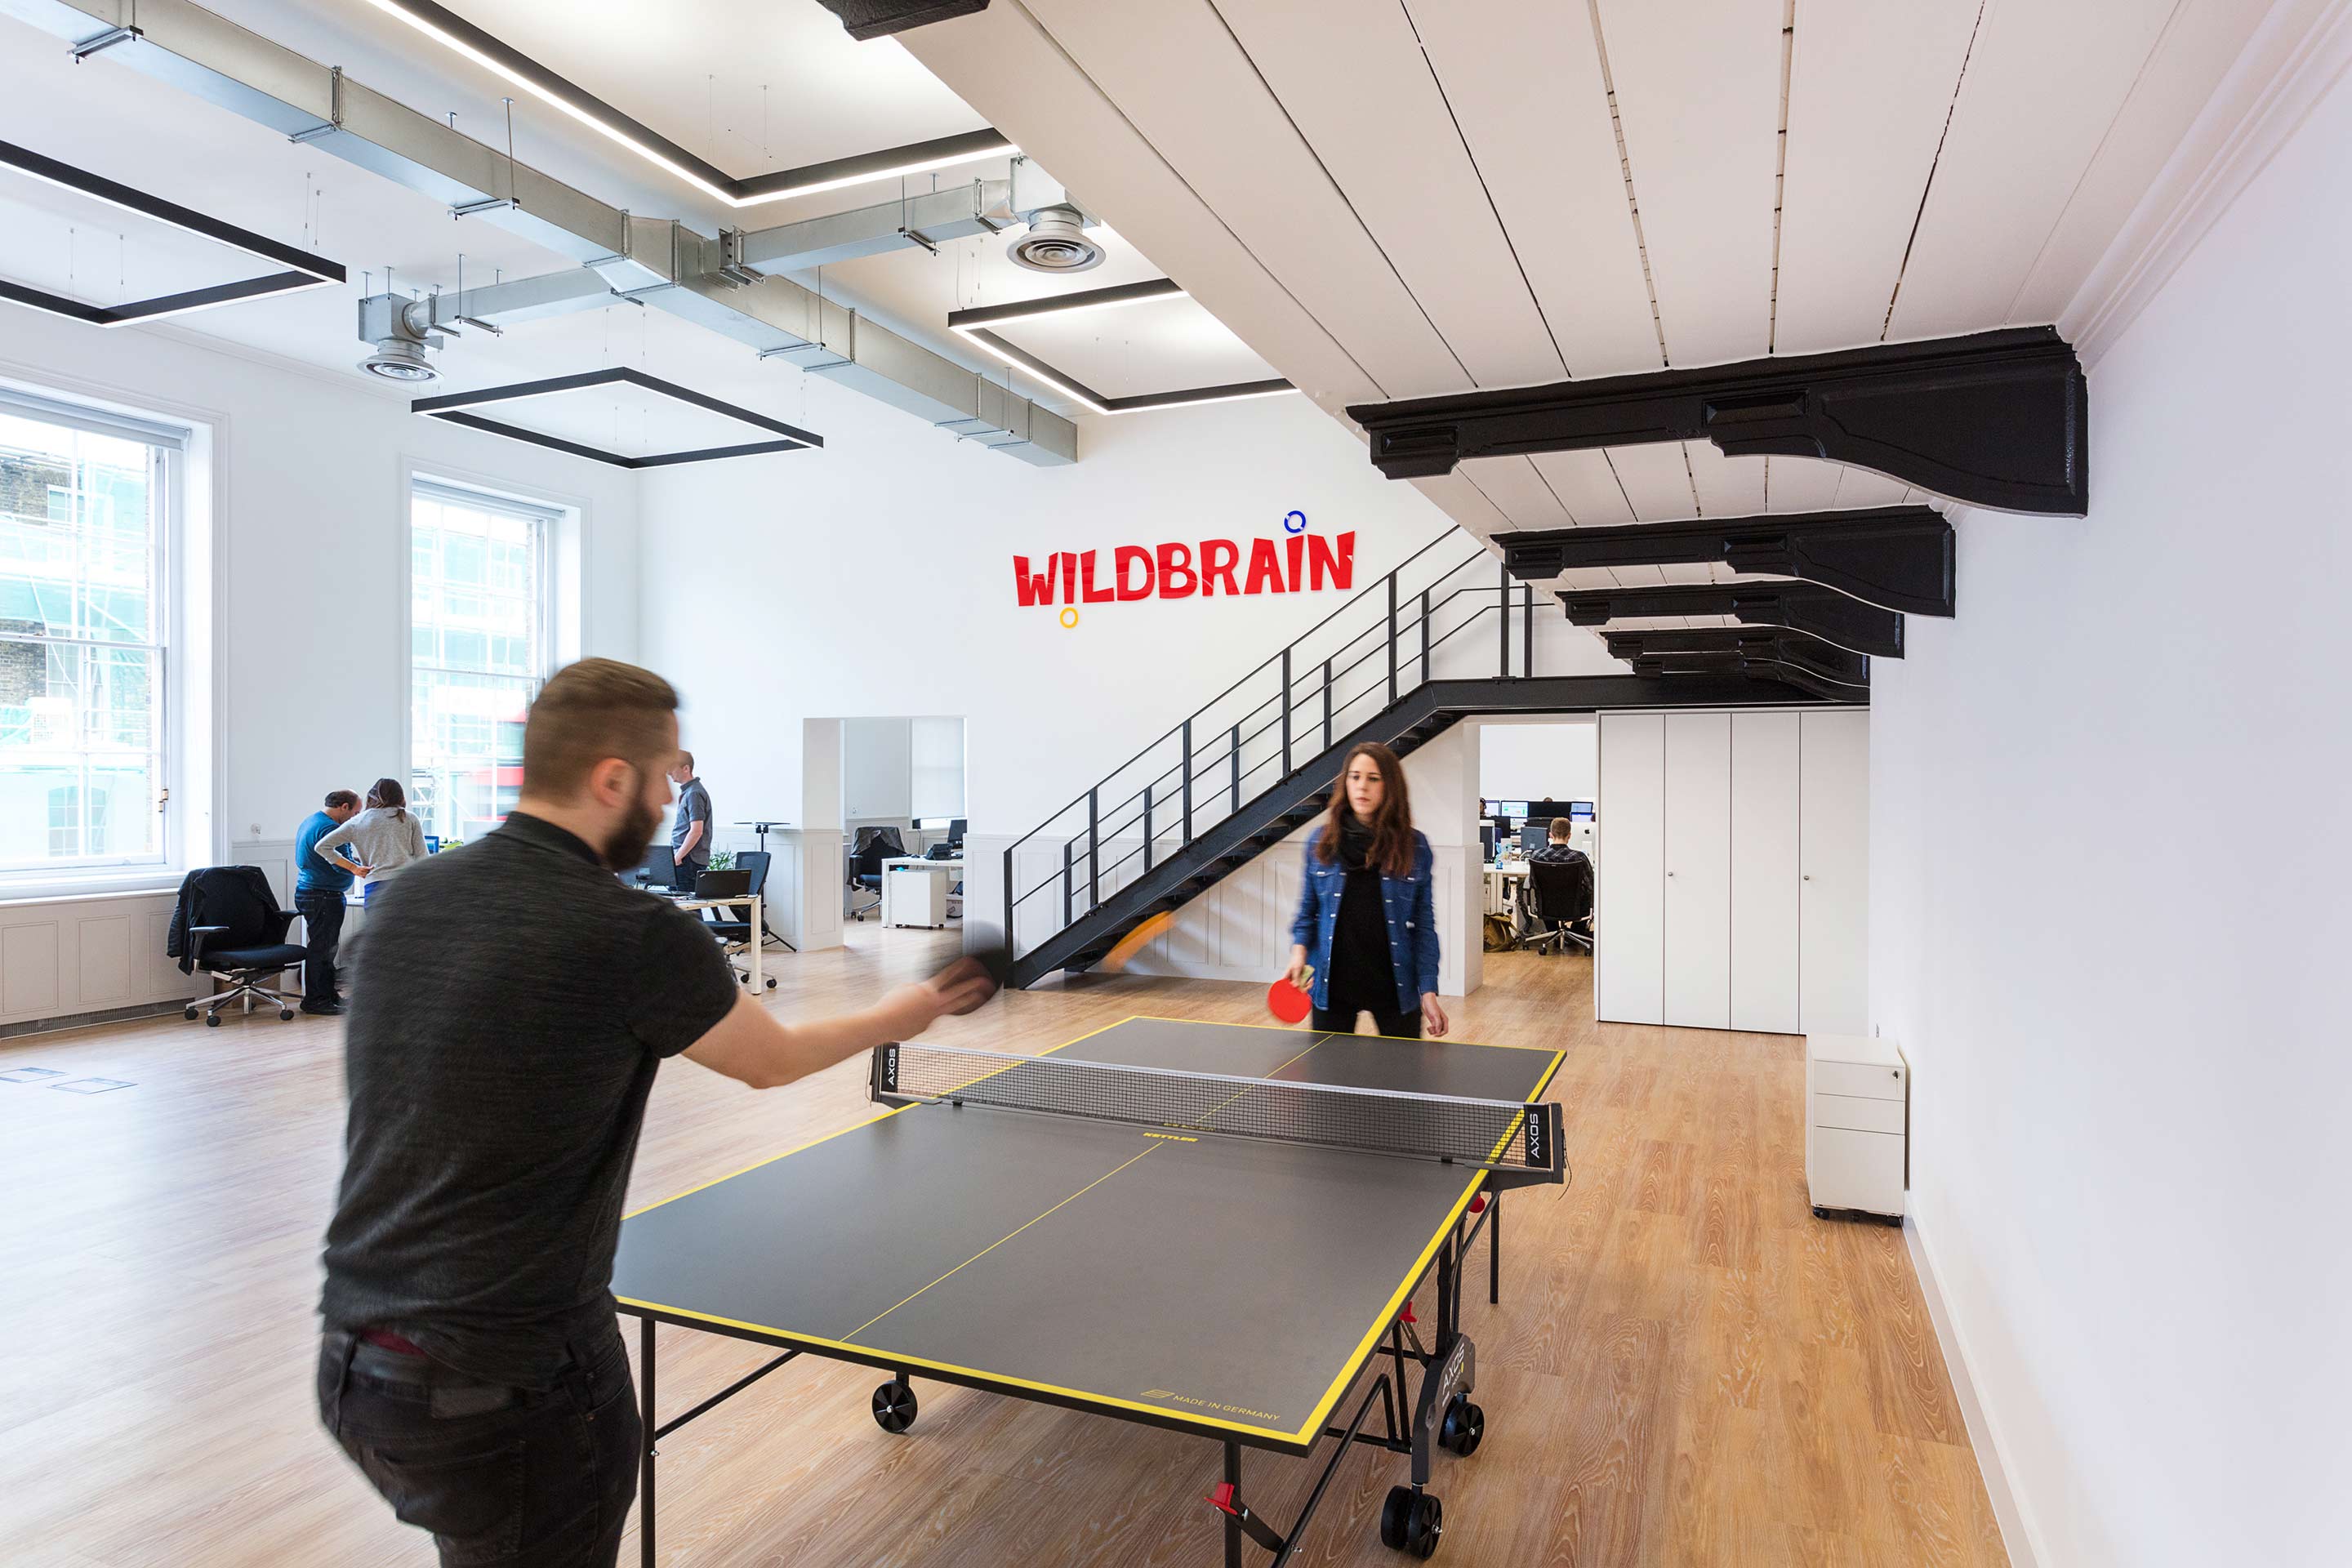 Table tennis table incorporated into Wildbrain's workspace